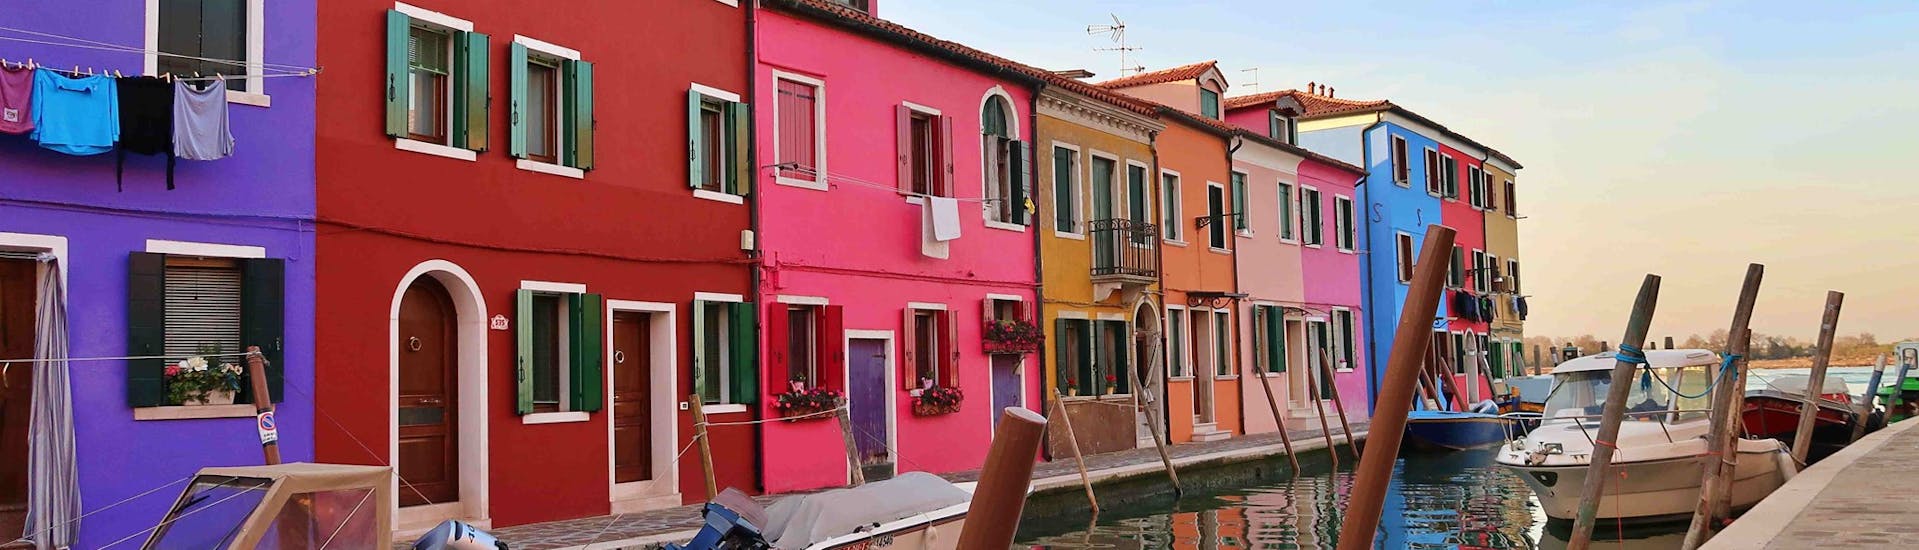 Colourful houses along a canal in Burano seen during the Boat Trip from Venice to Murano & Burano with Il Doge di Venezia.